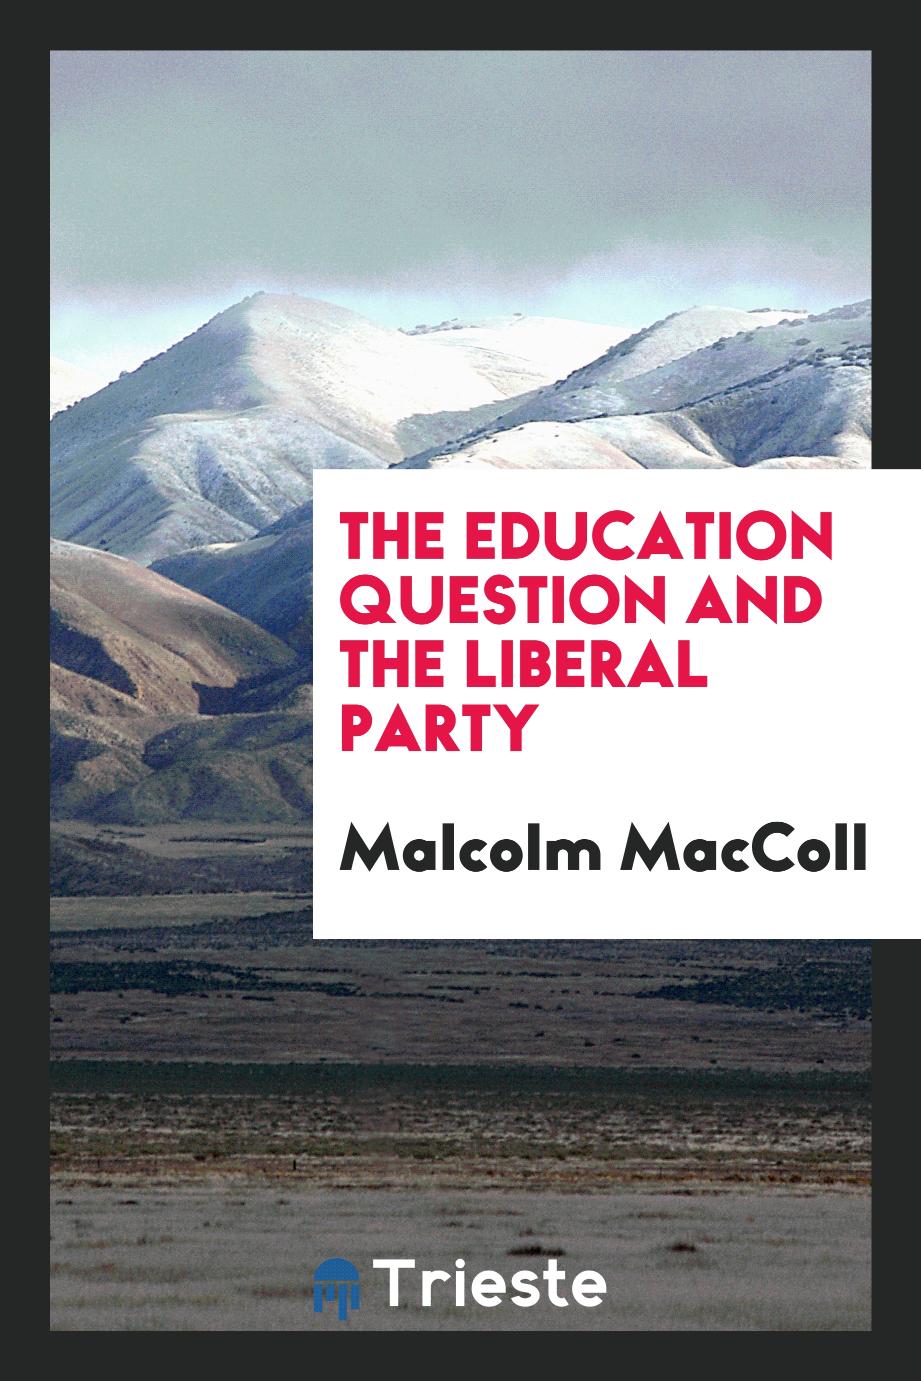 The Education Question and the Liberal Party